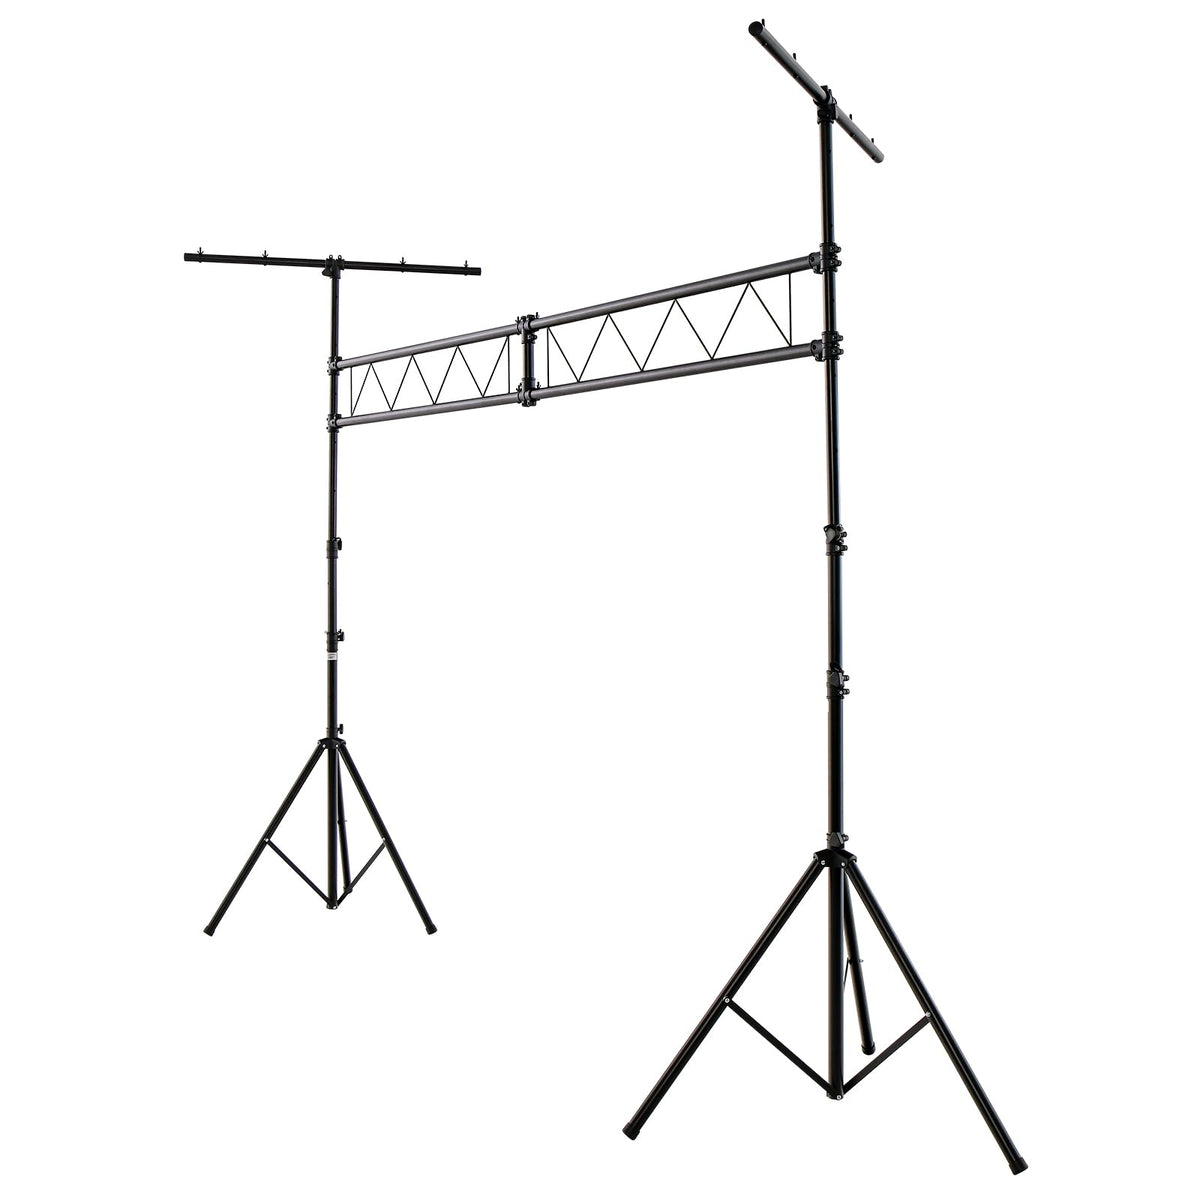 Giantex 4m Lighting Truss System, Heavy Duty Metal Lighting Stand with Adjustable Height